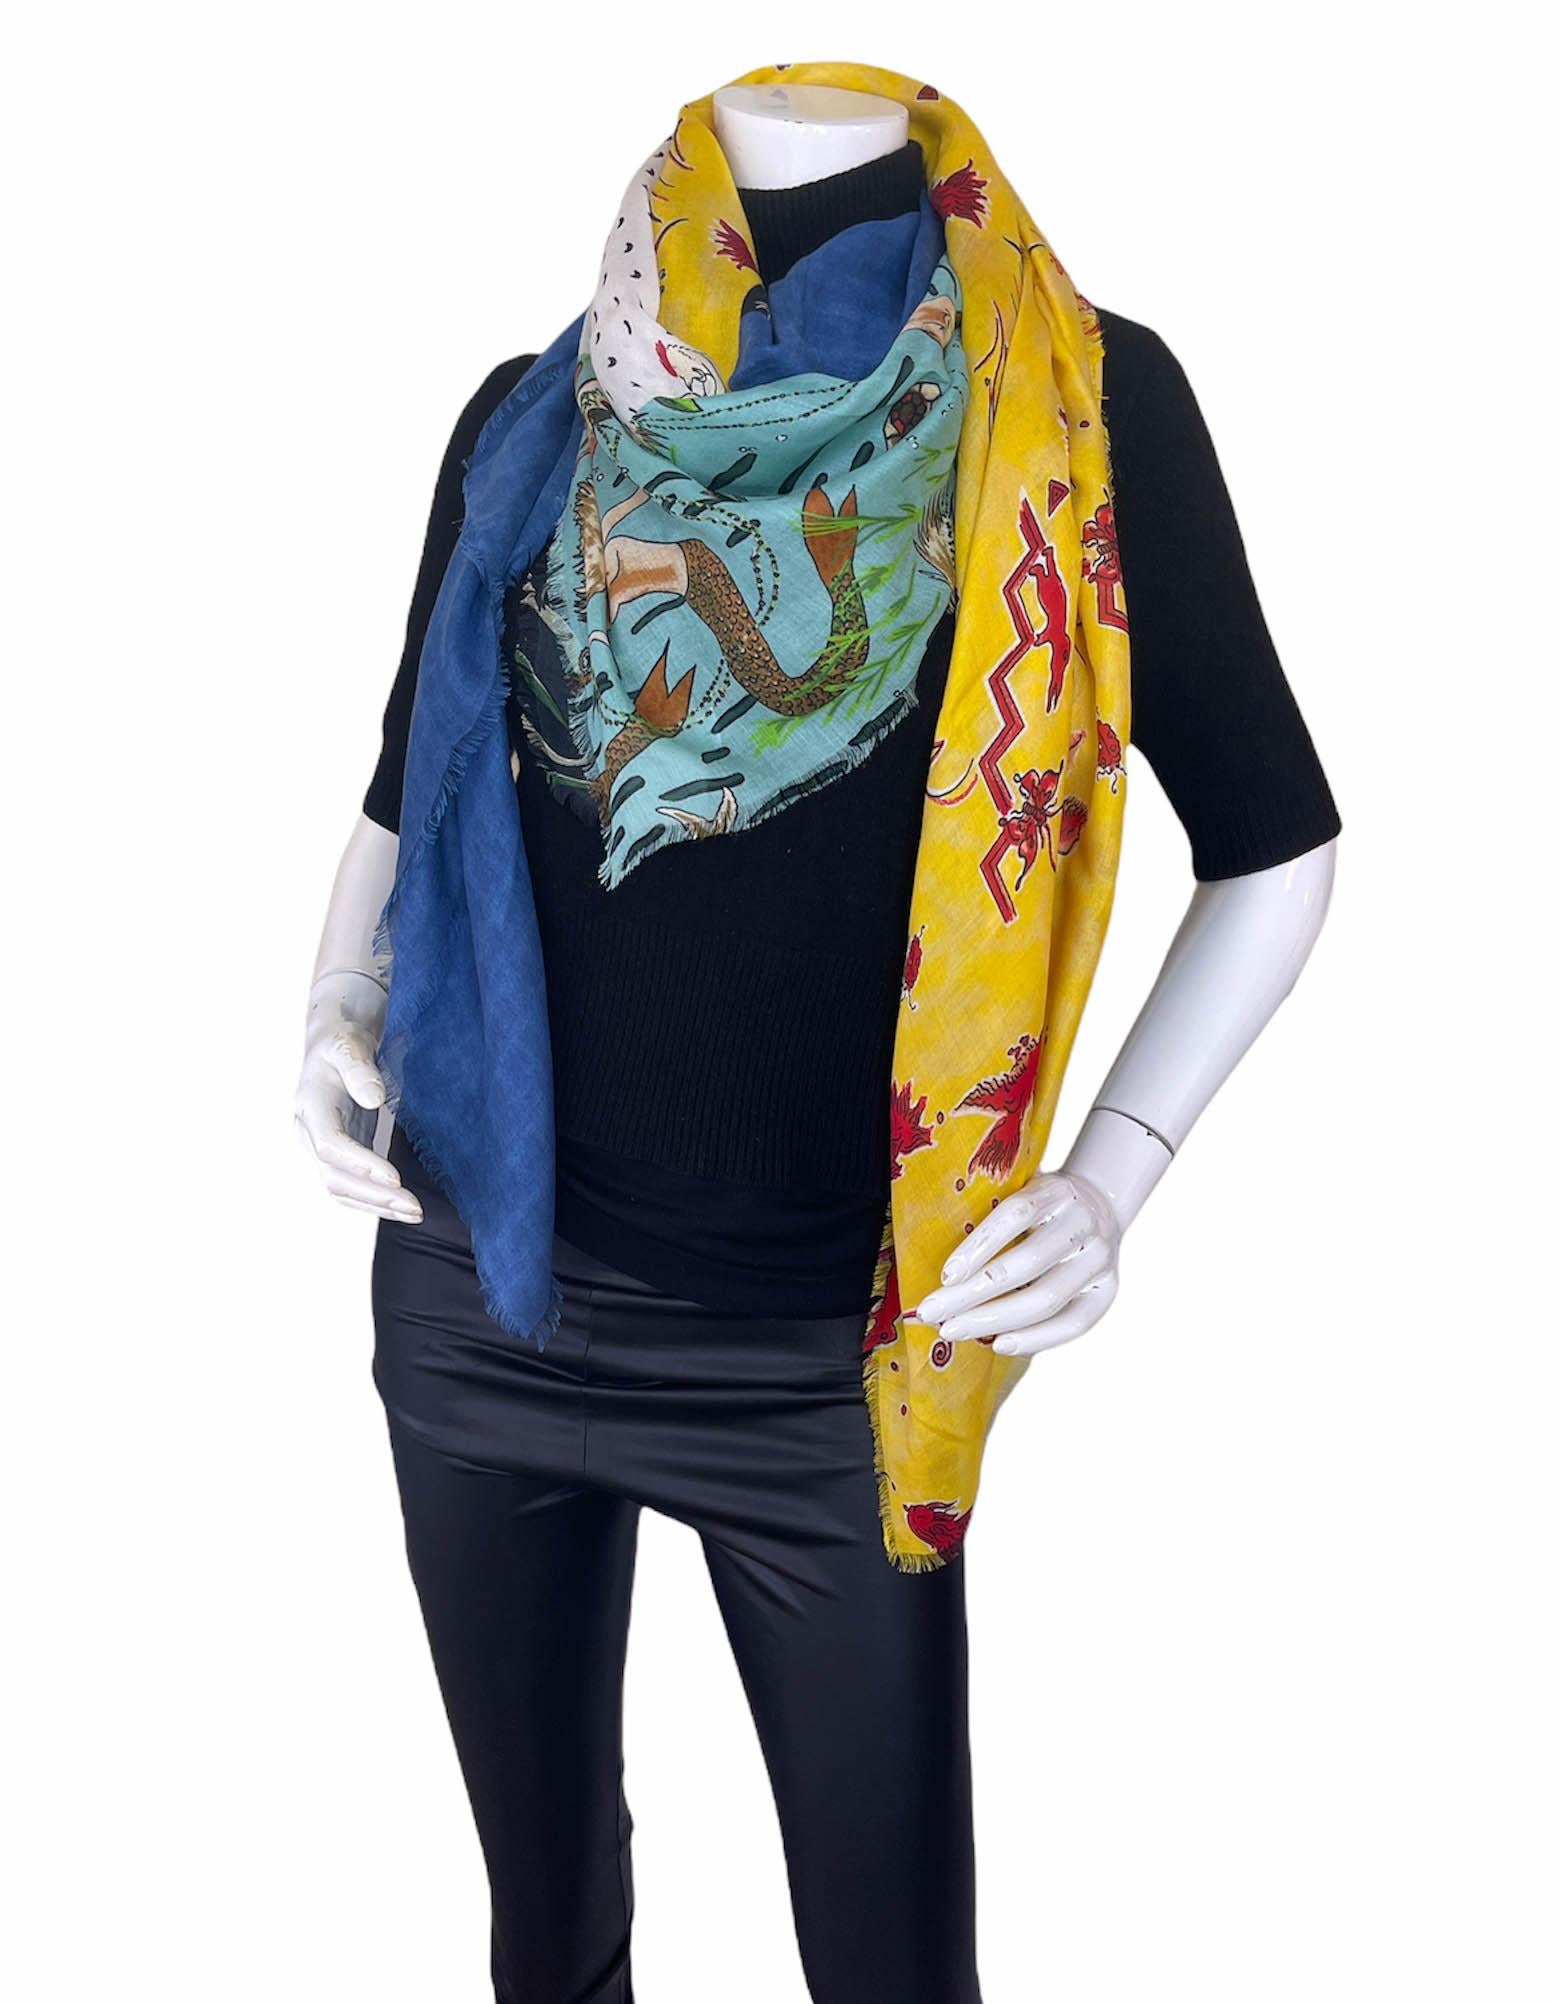 Loewe x Paula's Ibiza Multicolor Modal & Cashmere Patchwork Scarf

Made In: Italy
Color: Blue, black, yellow, red, cream
Materials: 90% modal, 10% cashmere
Overall Condition: Excellent
Estimated Retail: $416
Includes: Loewe